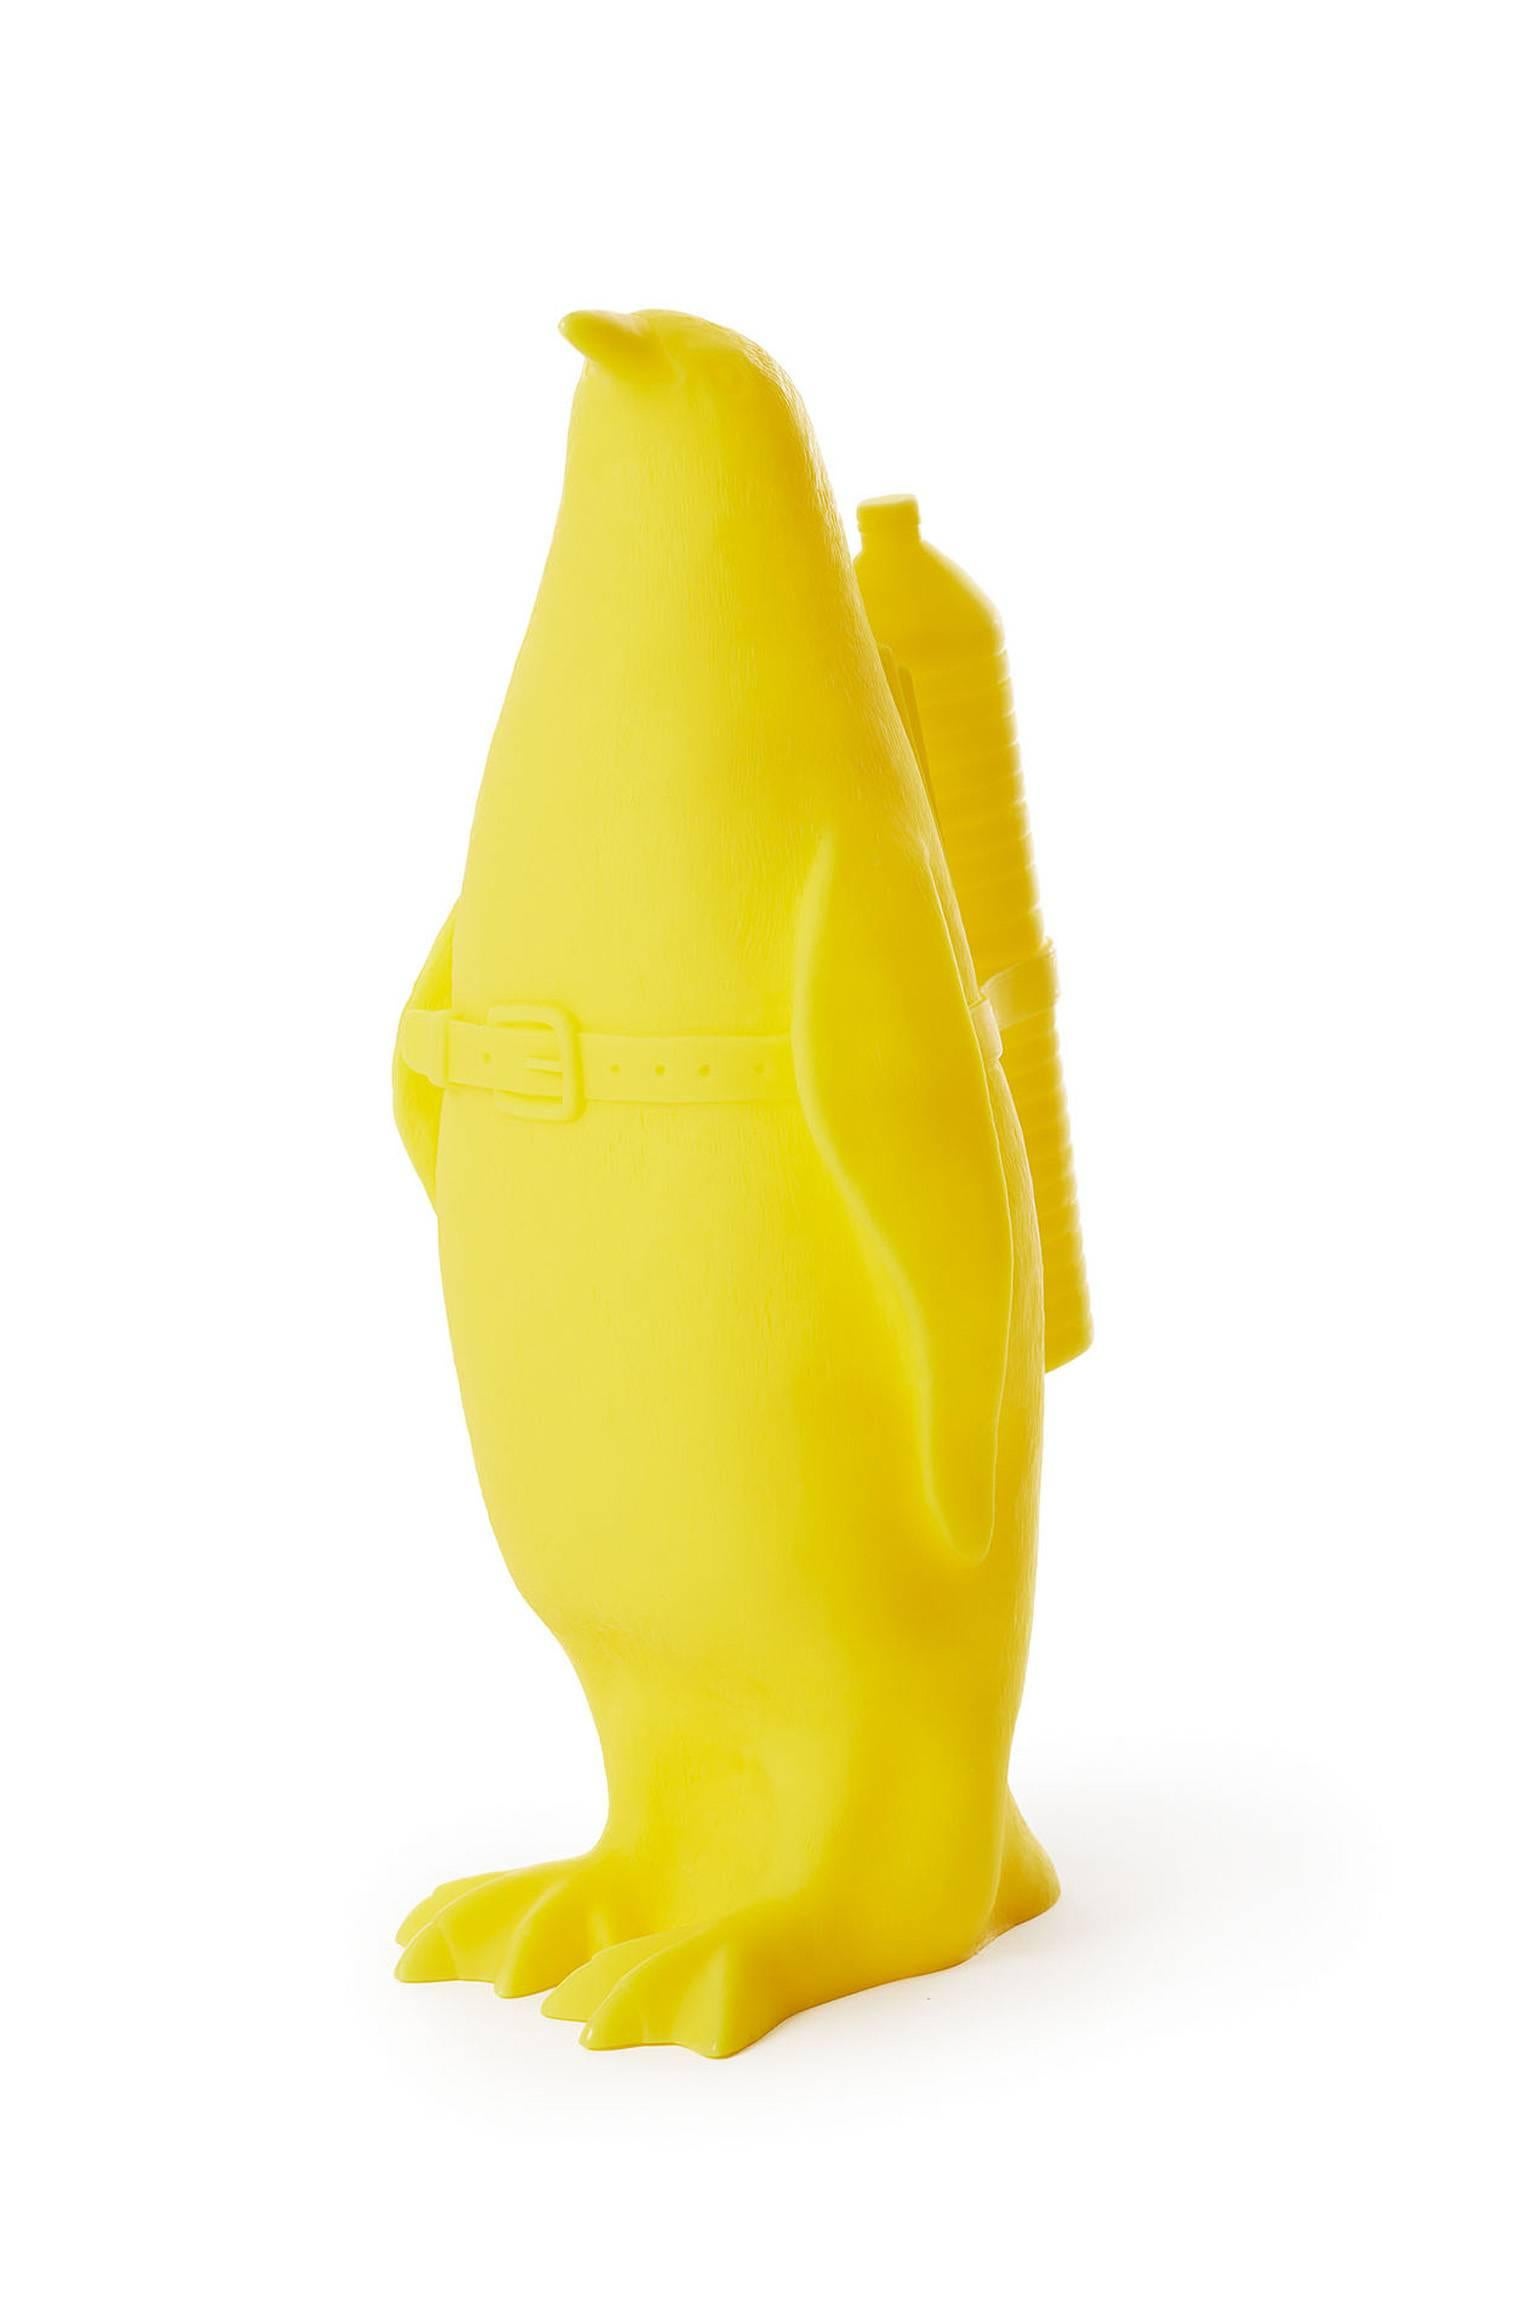 William Sweetlove Figurative Sculpture - Small cloned Penguin with water bottle. 